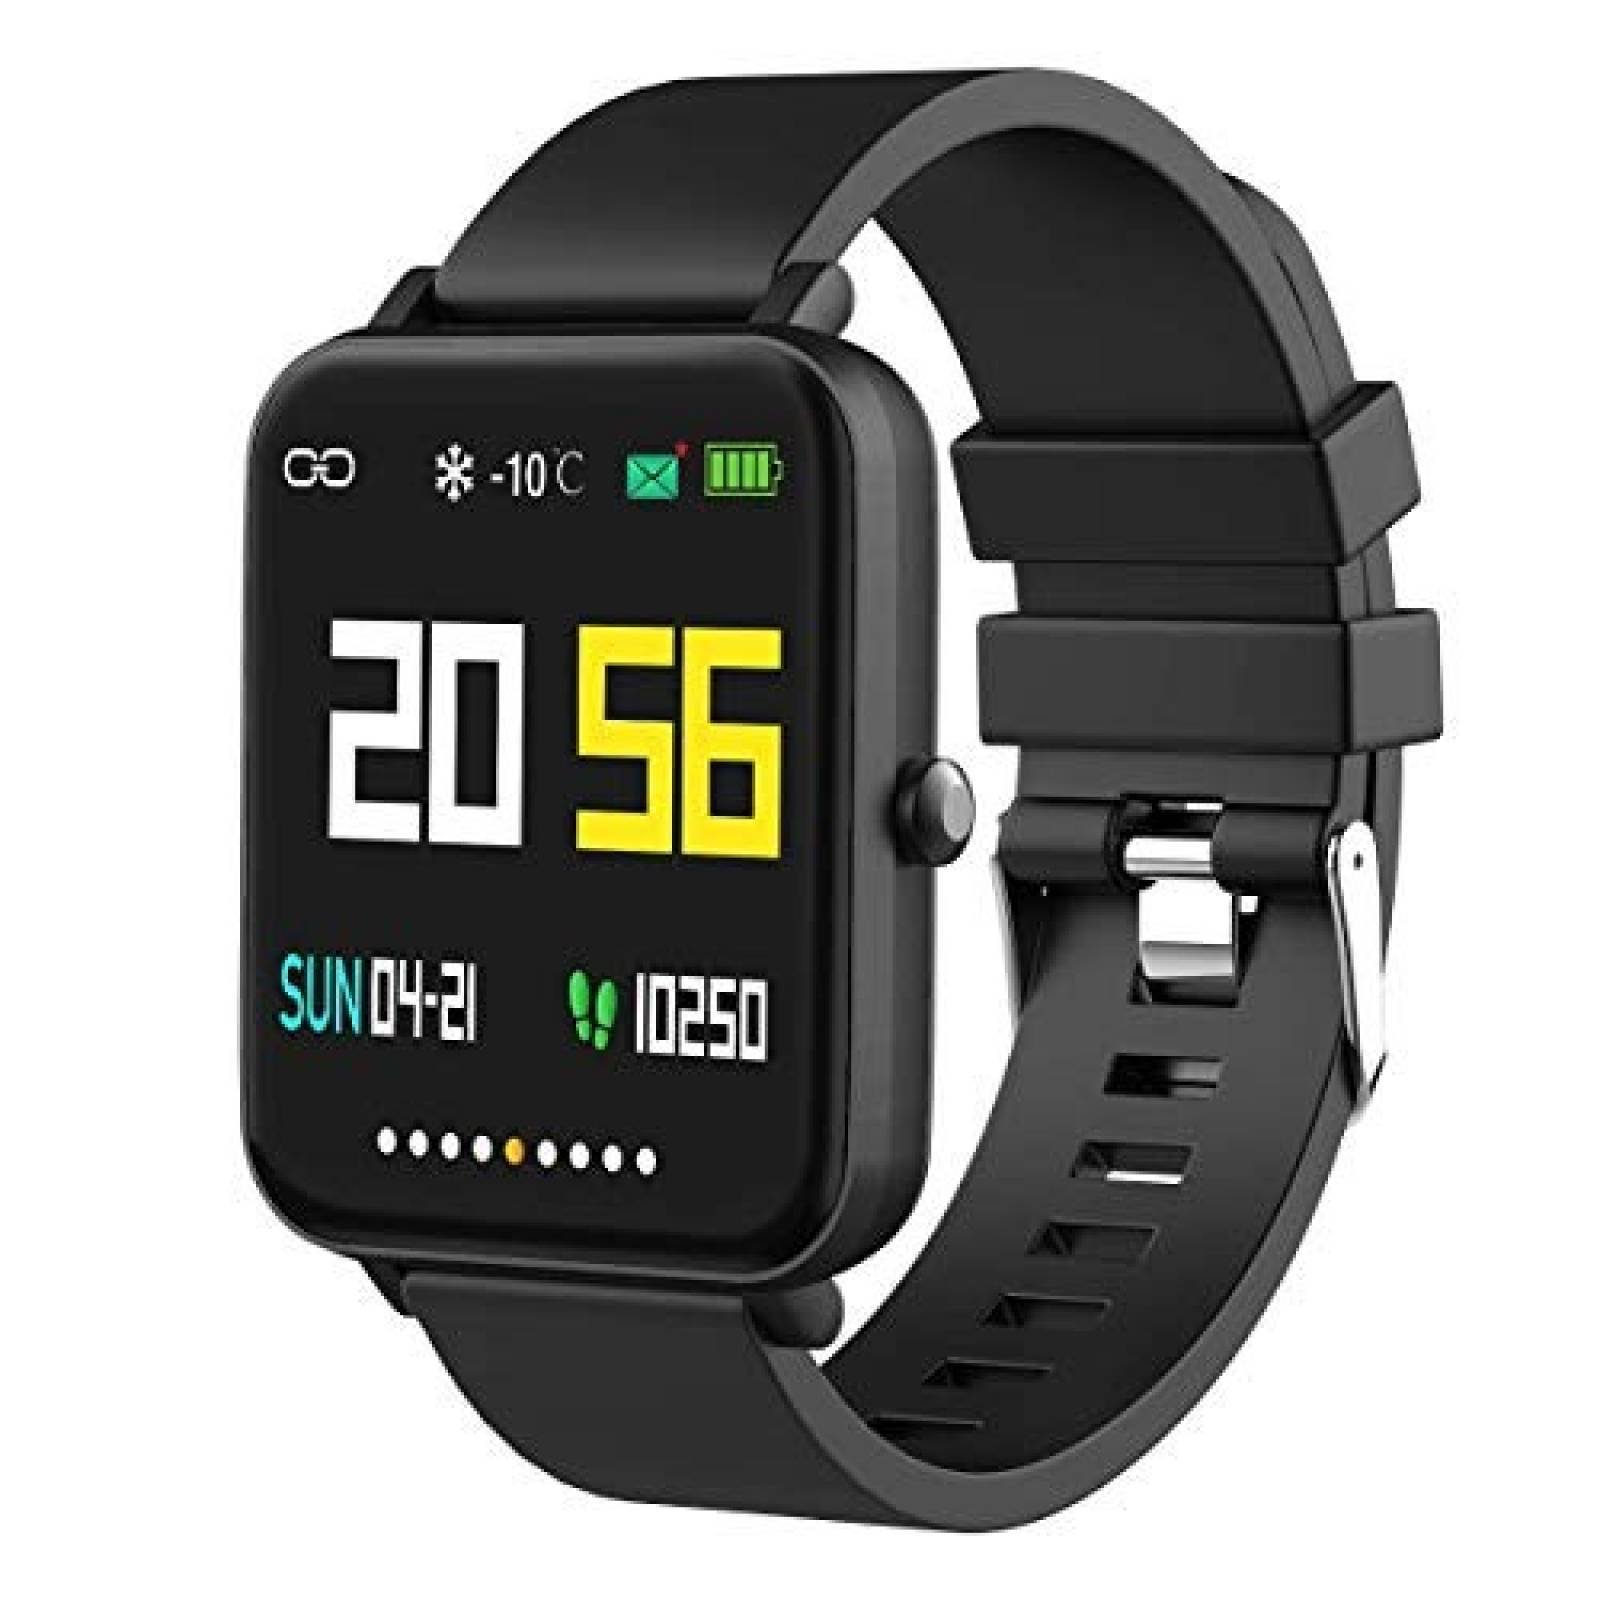 Smartwatch Foronechi Z12-BK 1.54" IP68 p/ Android iOS -Negro